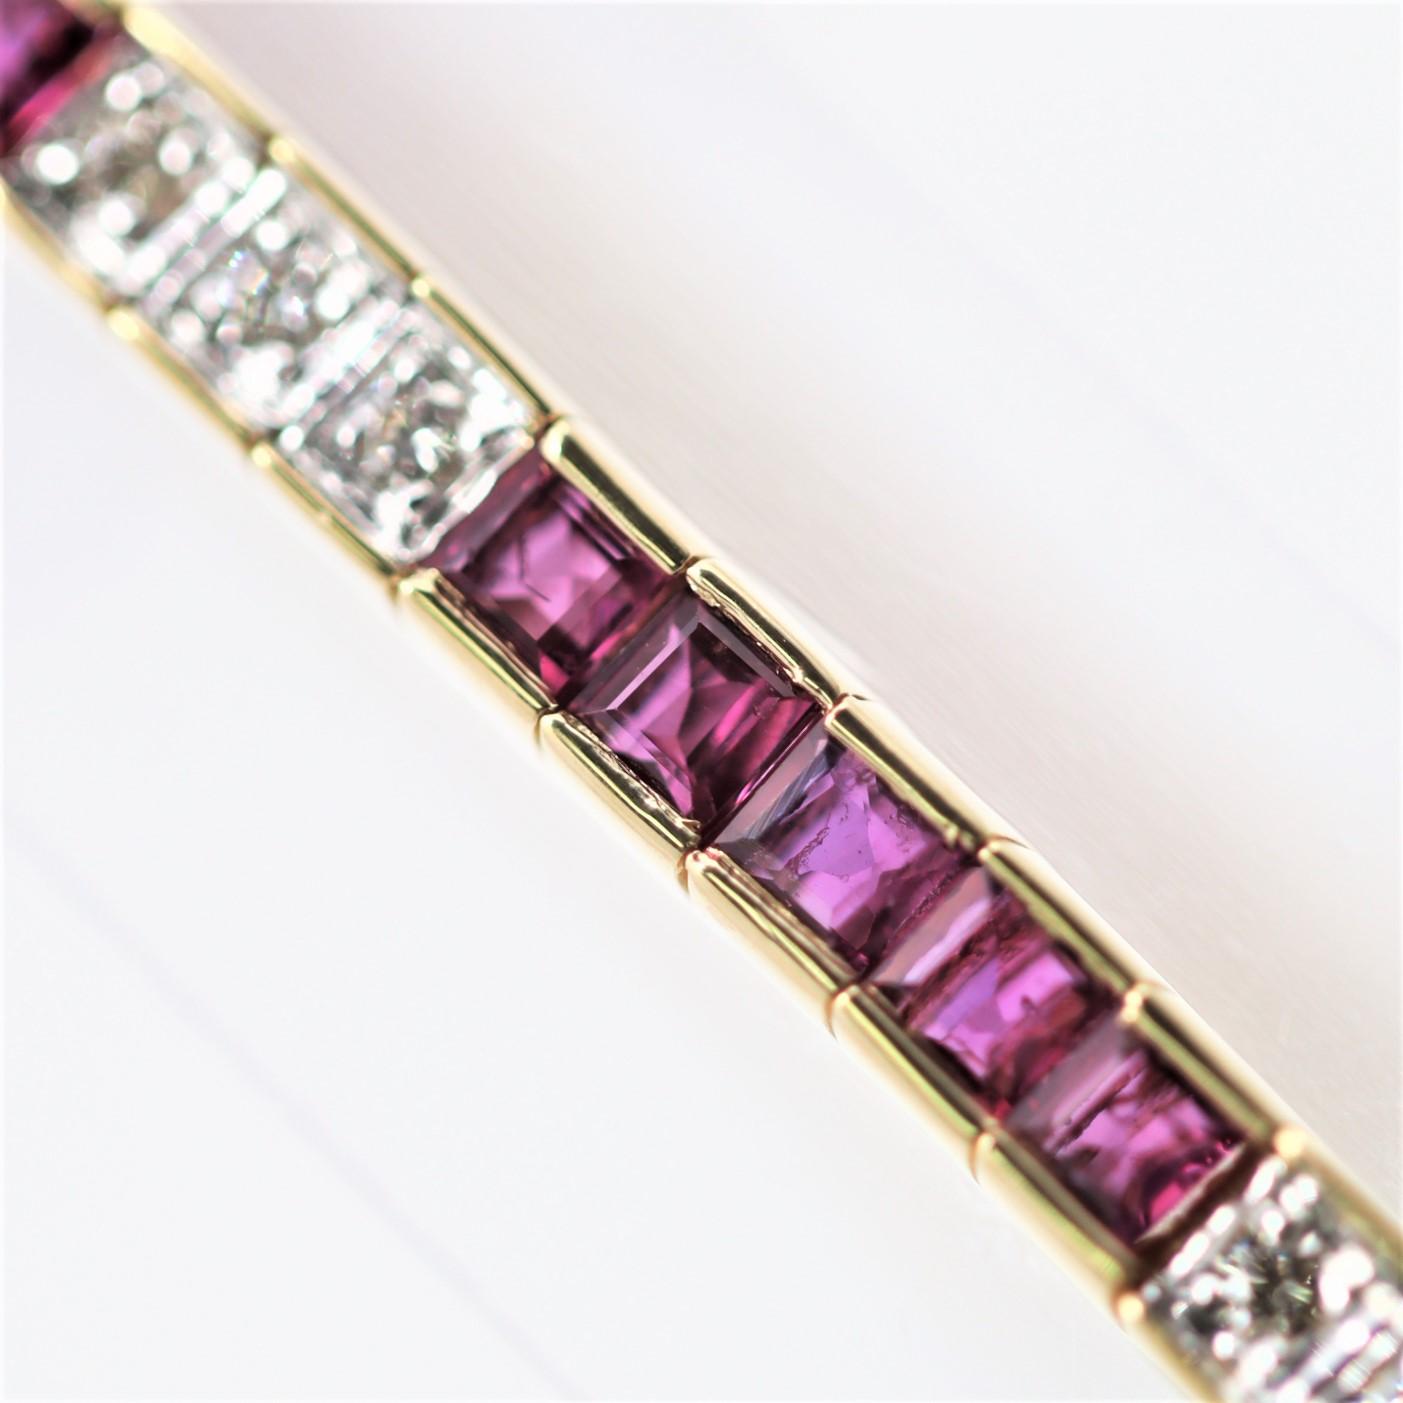 A classy and stylish line bracelet featuring 5.20 carats of square French-cut rubies along with 0.45 carats of round brilliant-cut diamonds. The rubies have an intense red color and are accented by the diamonds which add brilliance to the bracelet.